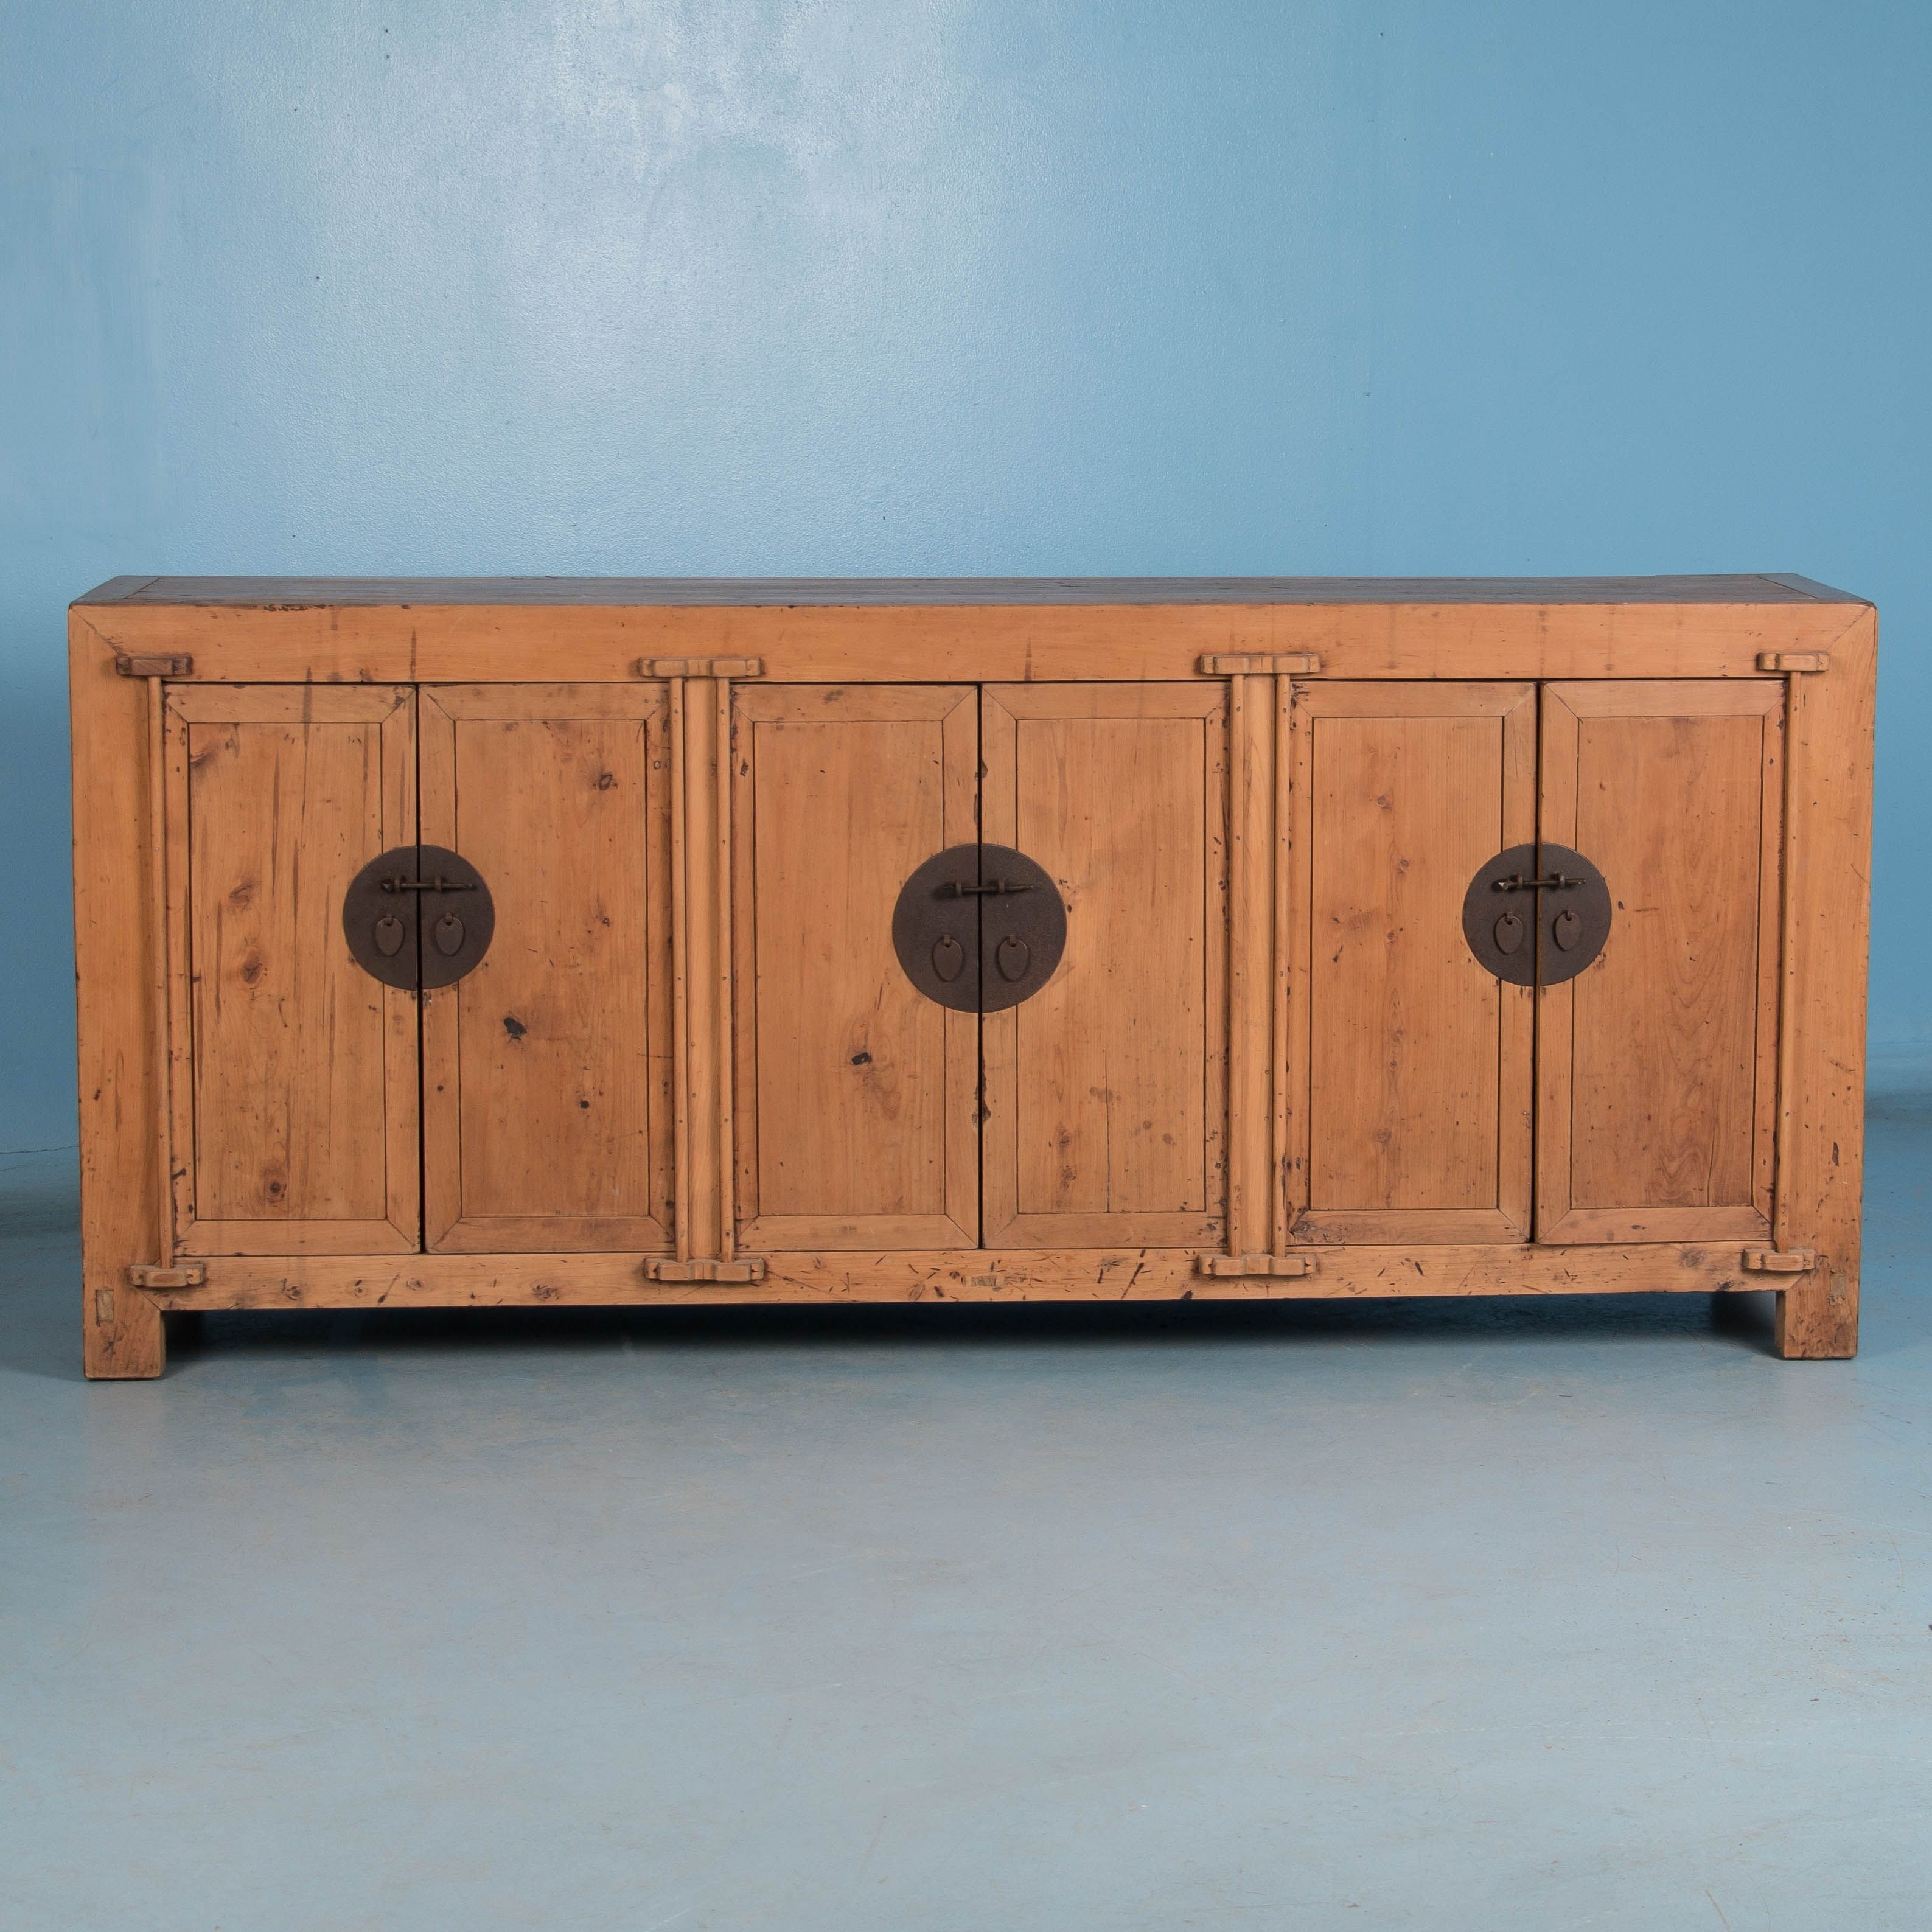 Sideboards | Scandinavian Antiques | Antique Furniture For Sale Intended For Most Current Natural South Pine Sideboards (View 11 of 20)